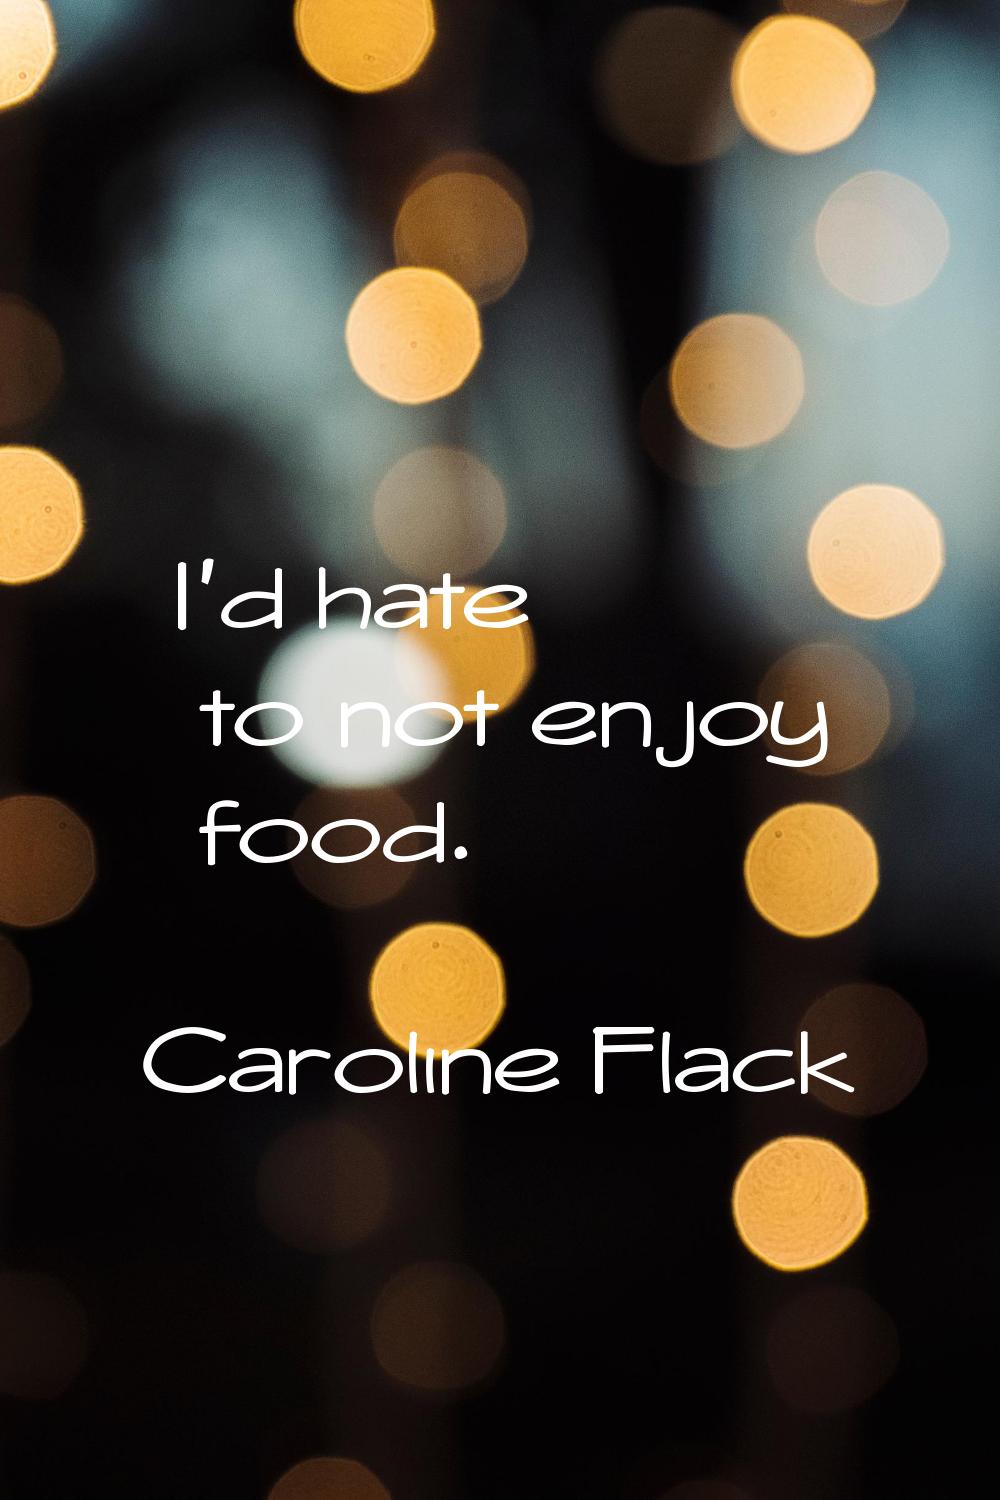 I'd hate to not enjoy food.